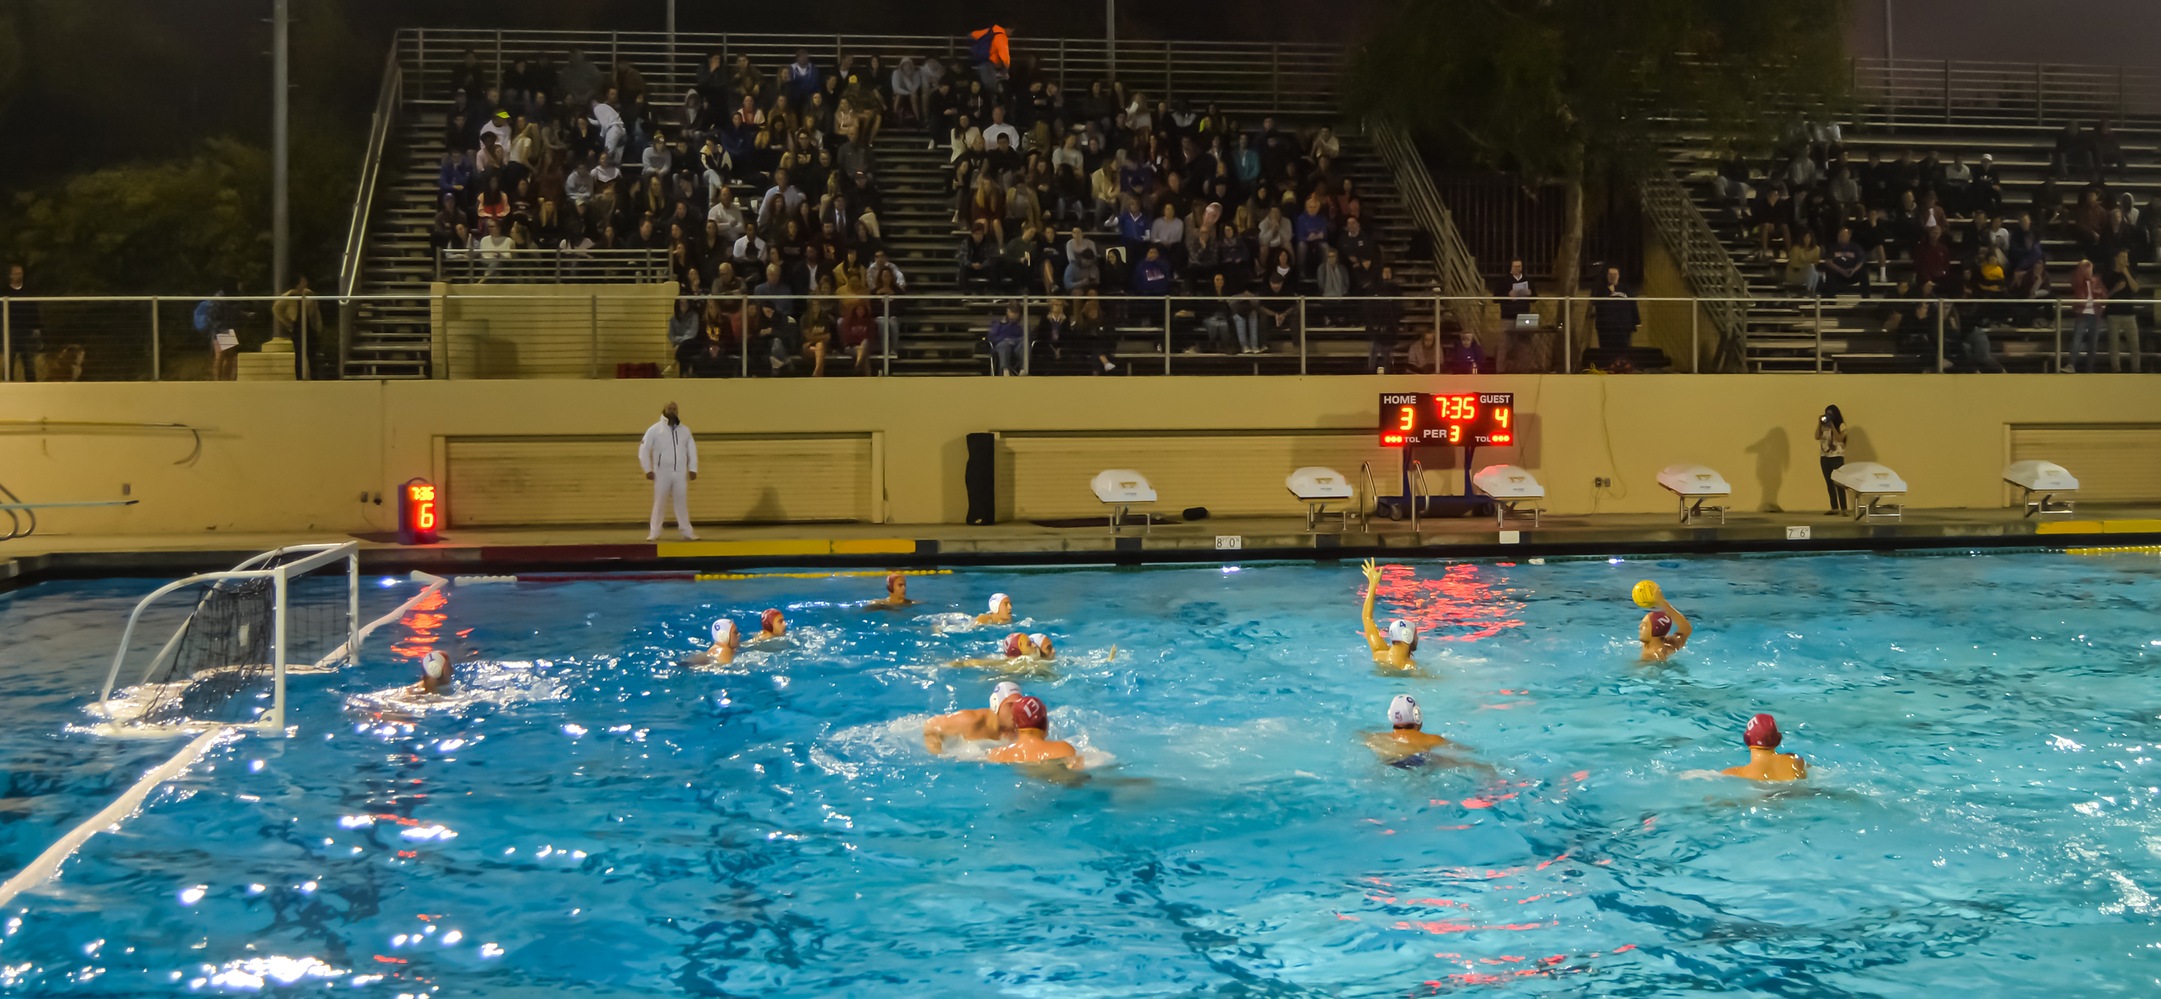 Axelrood Pool will welcome another big crowd on Friday night as the Sixth Street rivals meet again